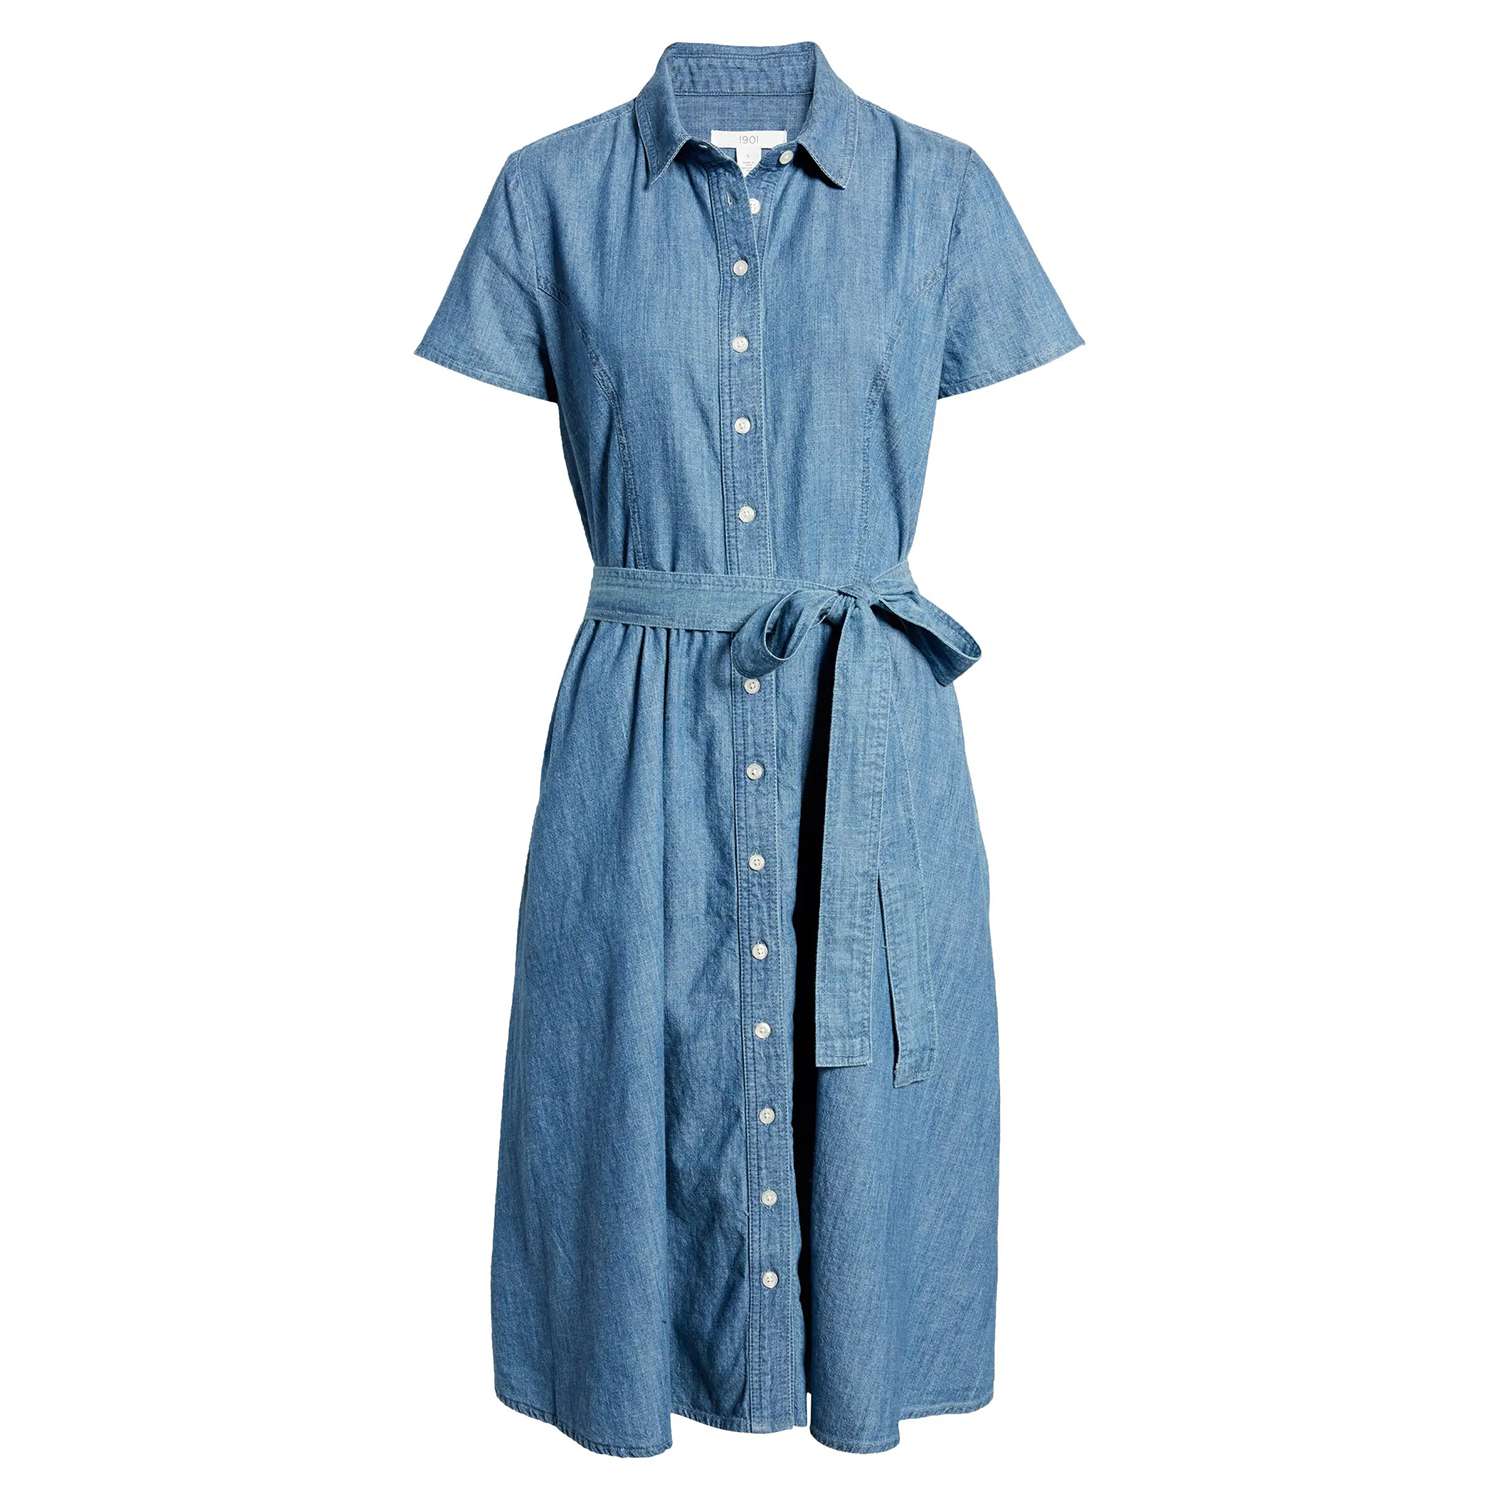 Kate Middleton's Gabriela Hearst Chambray Dress Is a Fall Staple ...